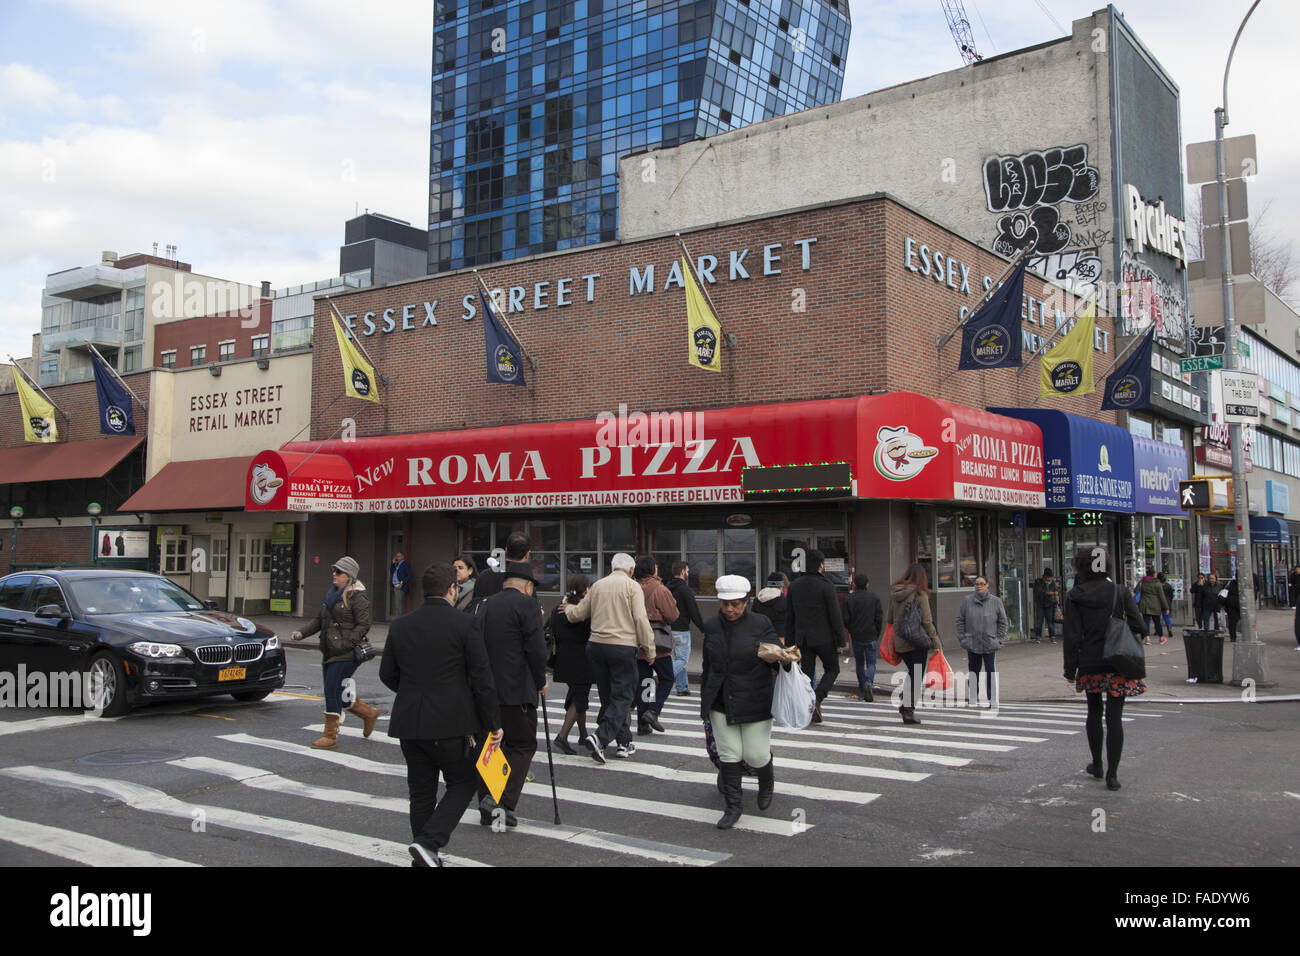 The Essex Street Market is a historic culinary destination on NYC's Lower East Side. It had its ups and downs over the decades but is now thriving with the cultural diversity in the neighborhood. Stock Photo